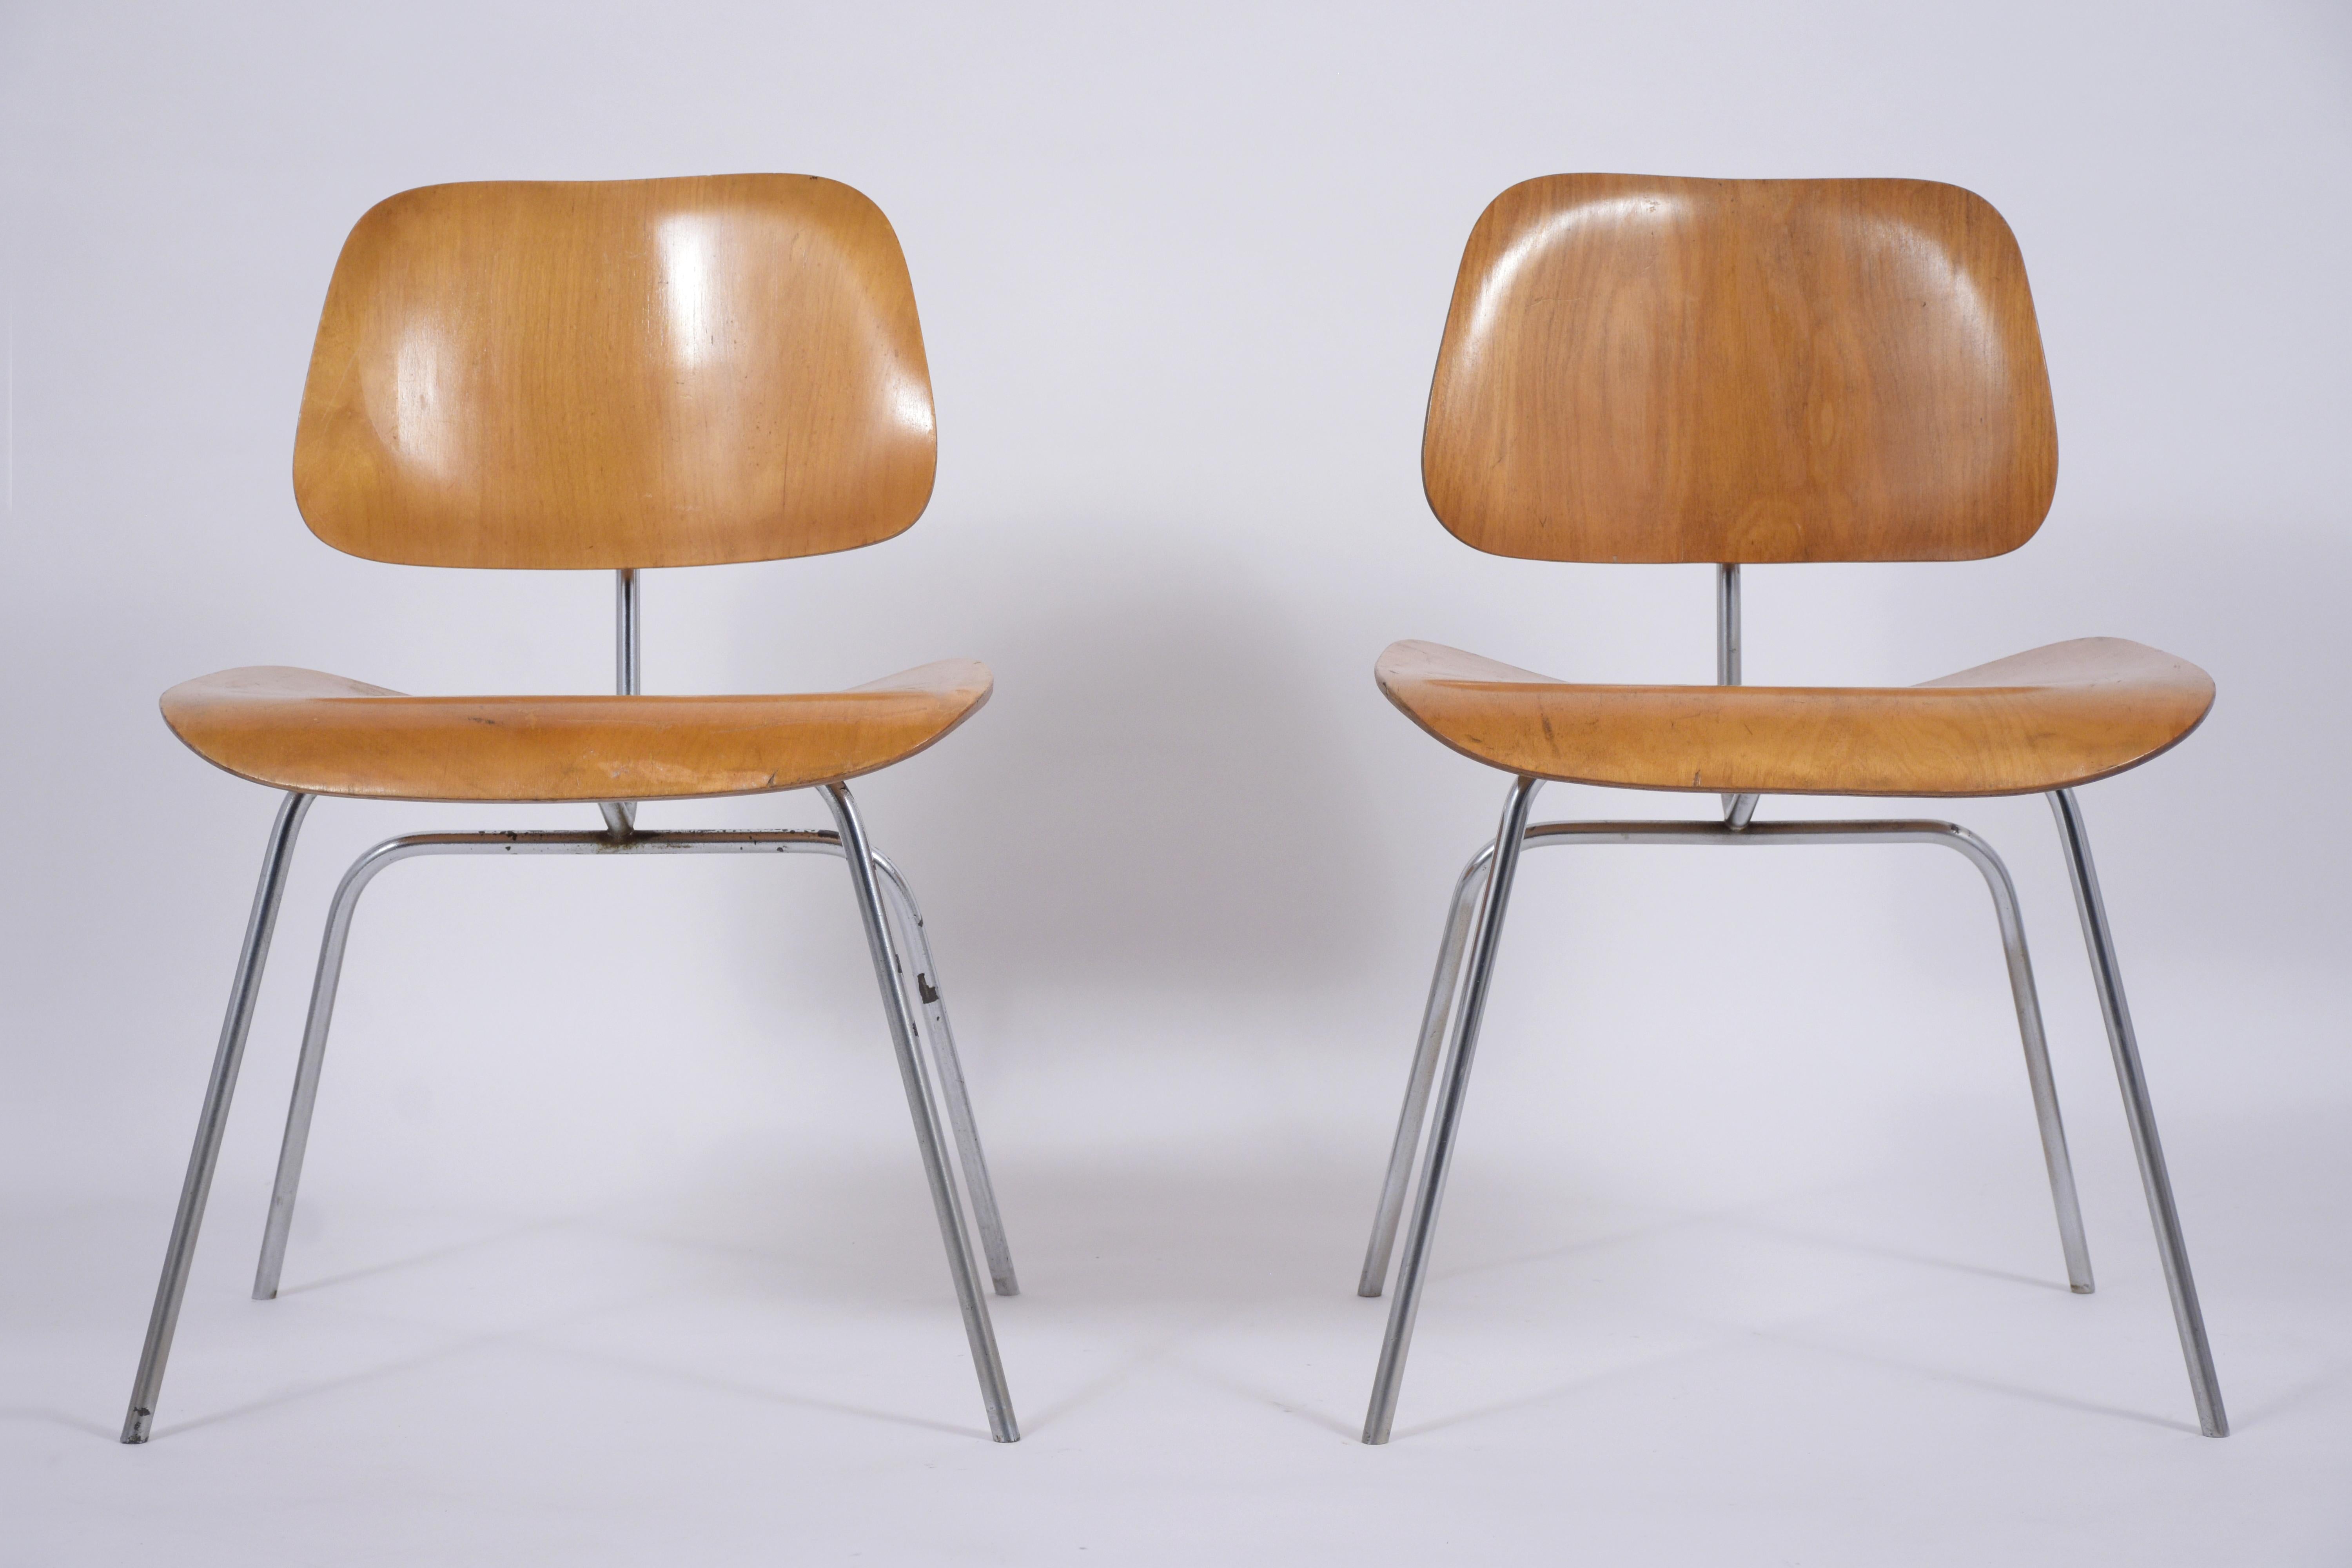 Step into the world of vintage elegance with our pair of early 1950s Mid-Century Modern Eames LCM lounge chairs by Herman Miller. In good condition and meticulously restored by our in-house team of expert craftsmen, these chairs are a testament to